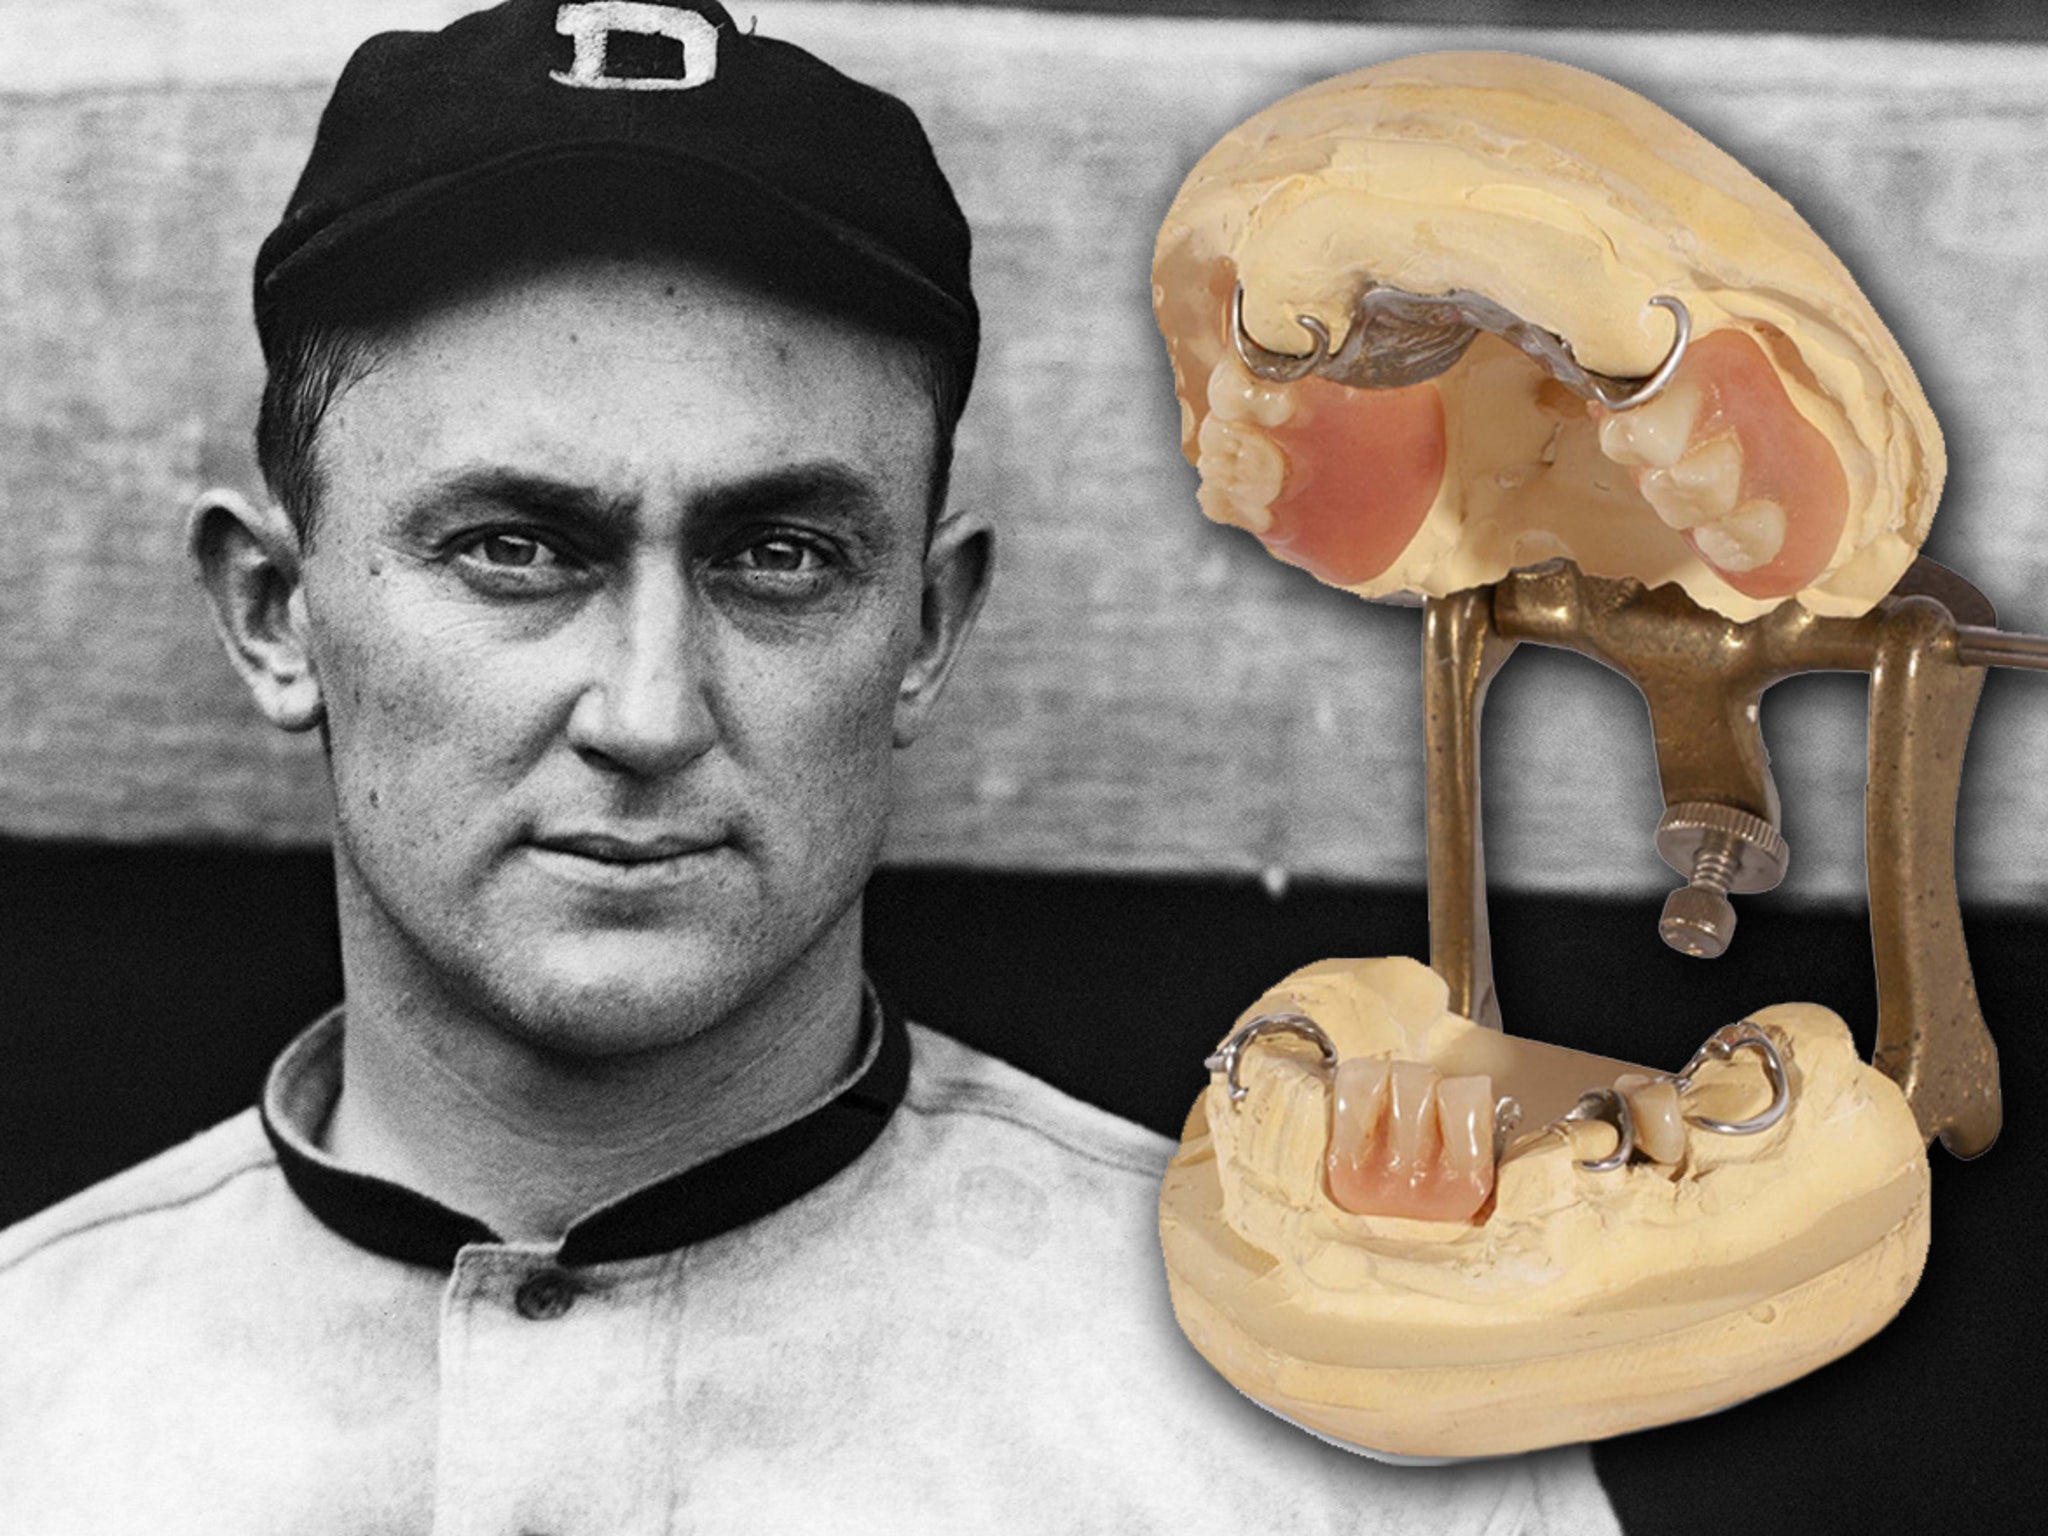 TY COBB: BASEBALL'S PREMIER PLAYER EARNED MOST PRESTIGIOUS DISTINCTION AS  FIRST HALL OF FAMER, DISSED BY MODERN LEADERSHIP